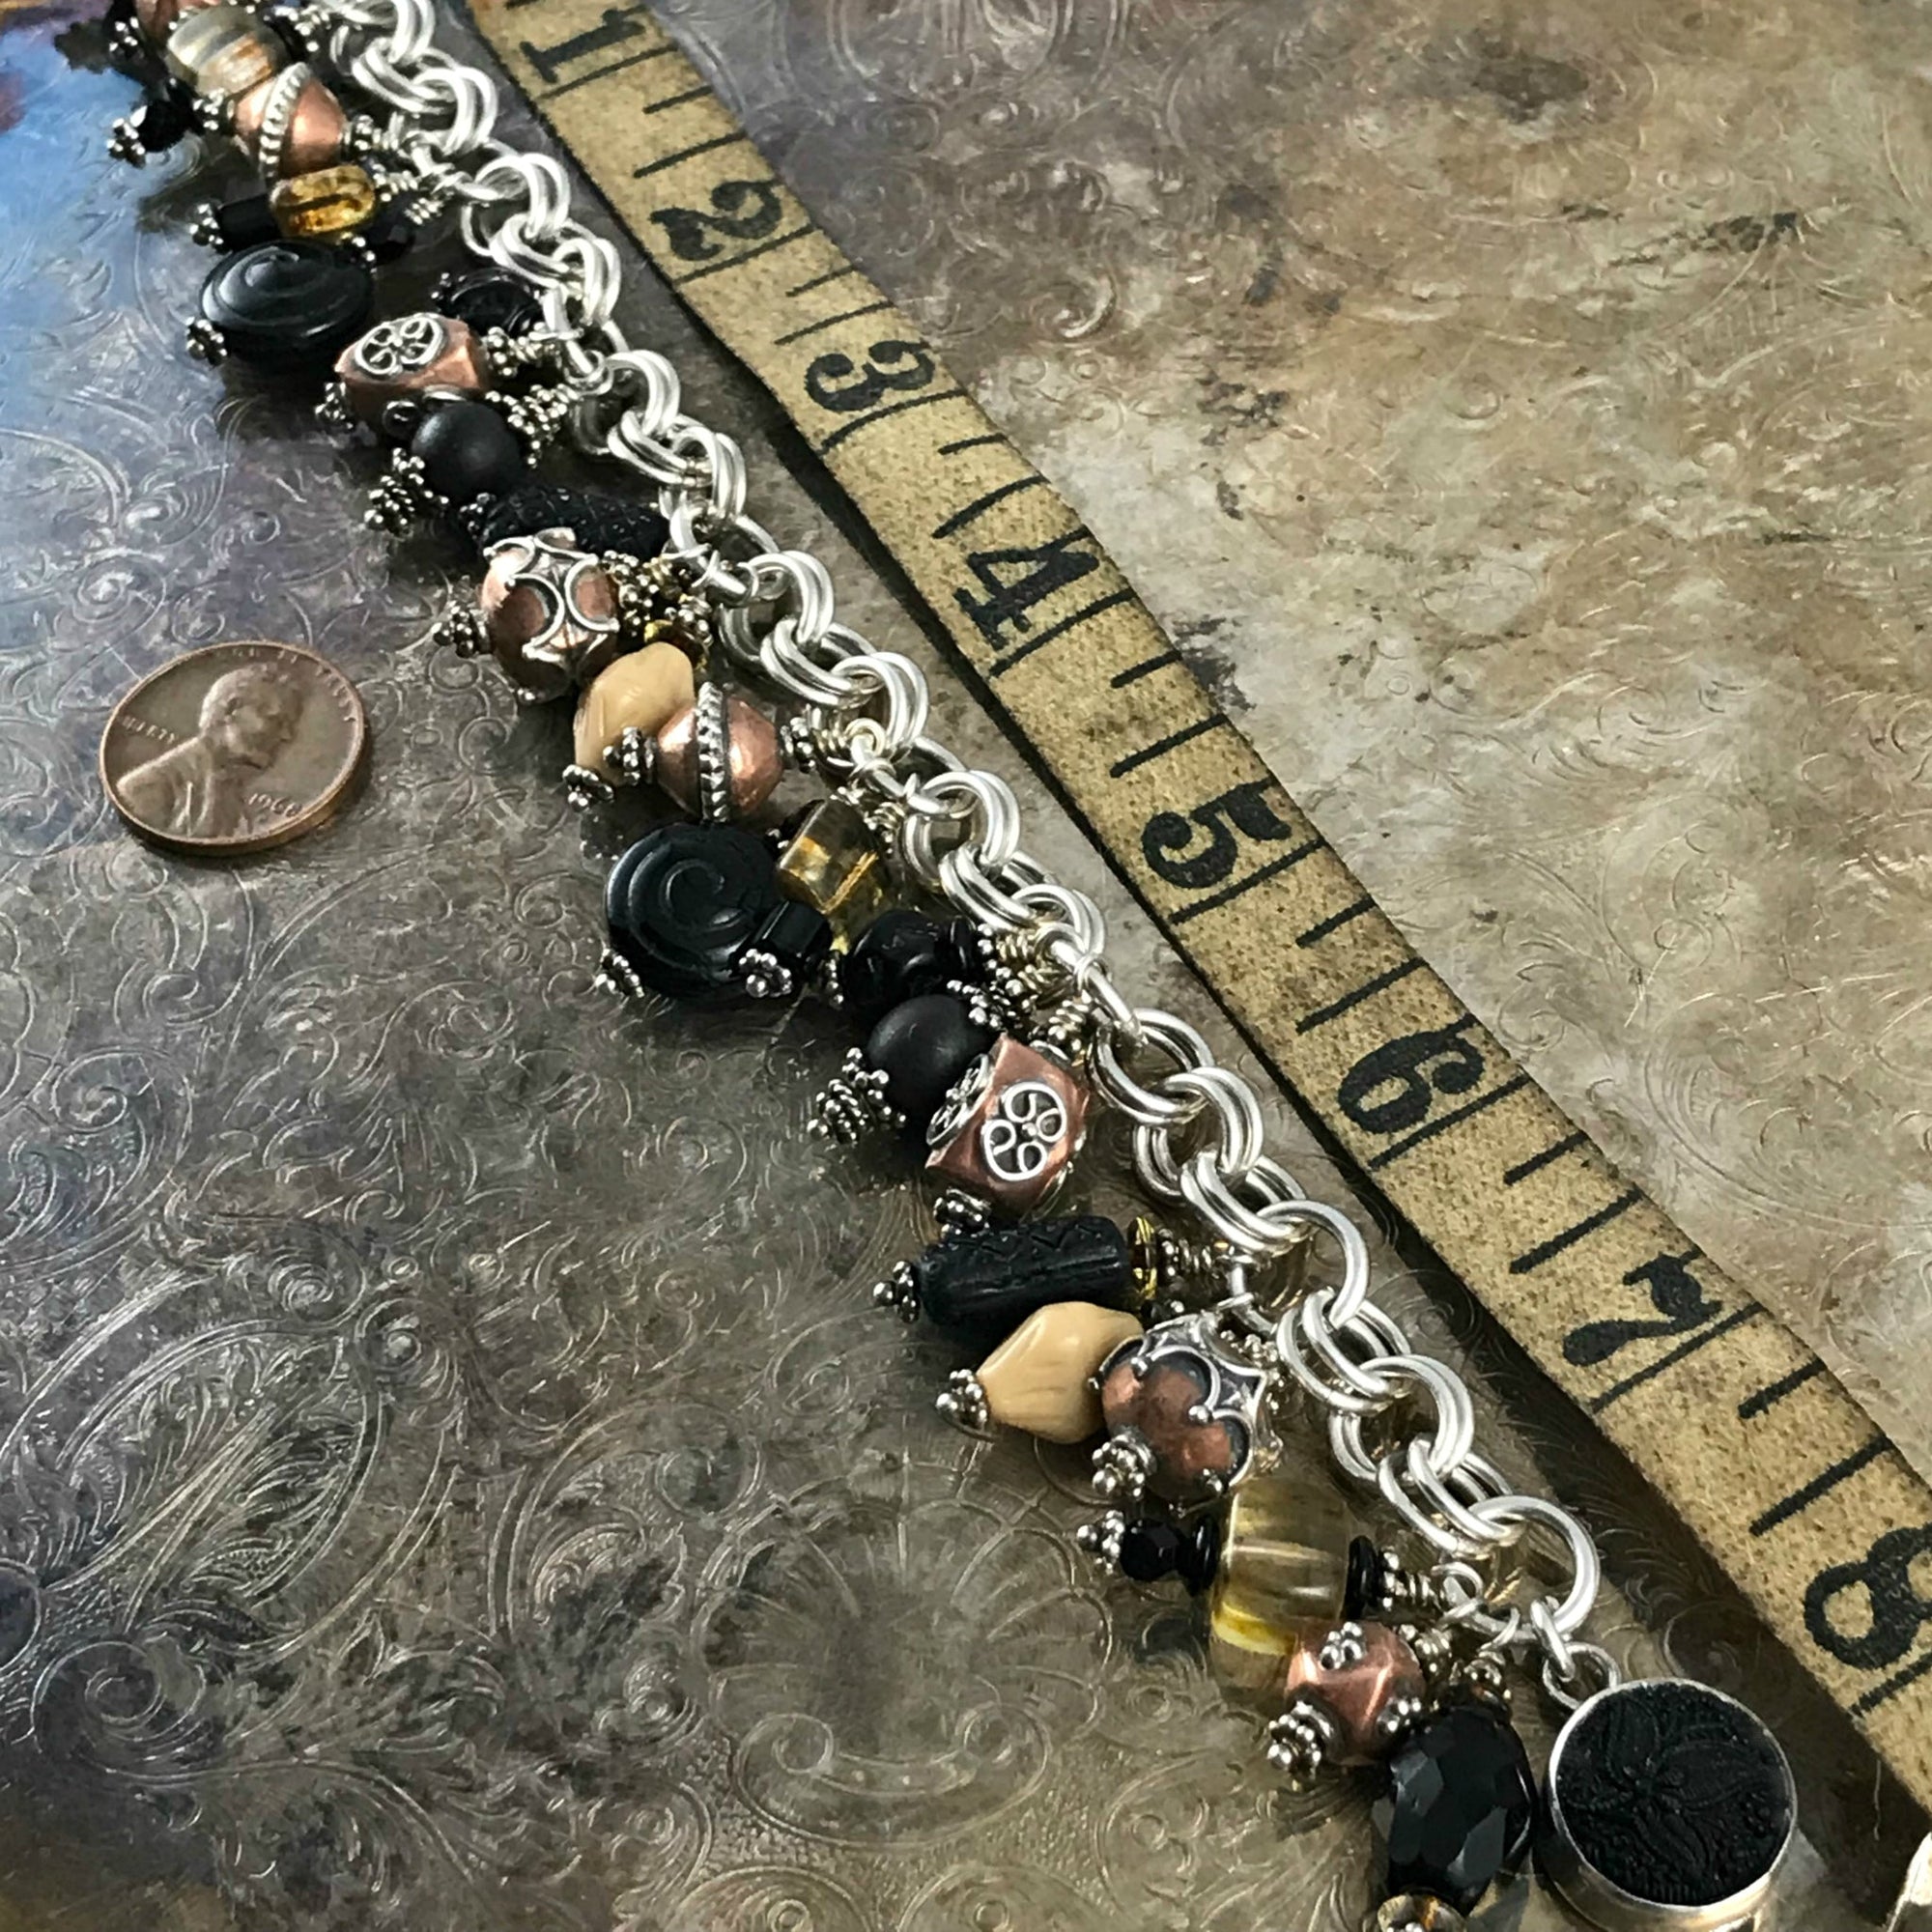 Available at Suzie Q Studio -- Czech glass, copper, sterling bead charm bracelet. The neutral colored bead-charms featured on this handcrafted sterling silver charm bracelet will go with a wide variety of styles and colors of outfits in your wardrobe. 